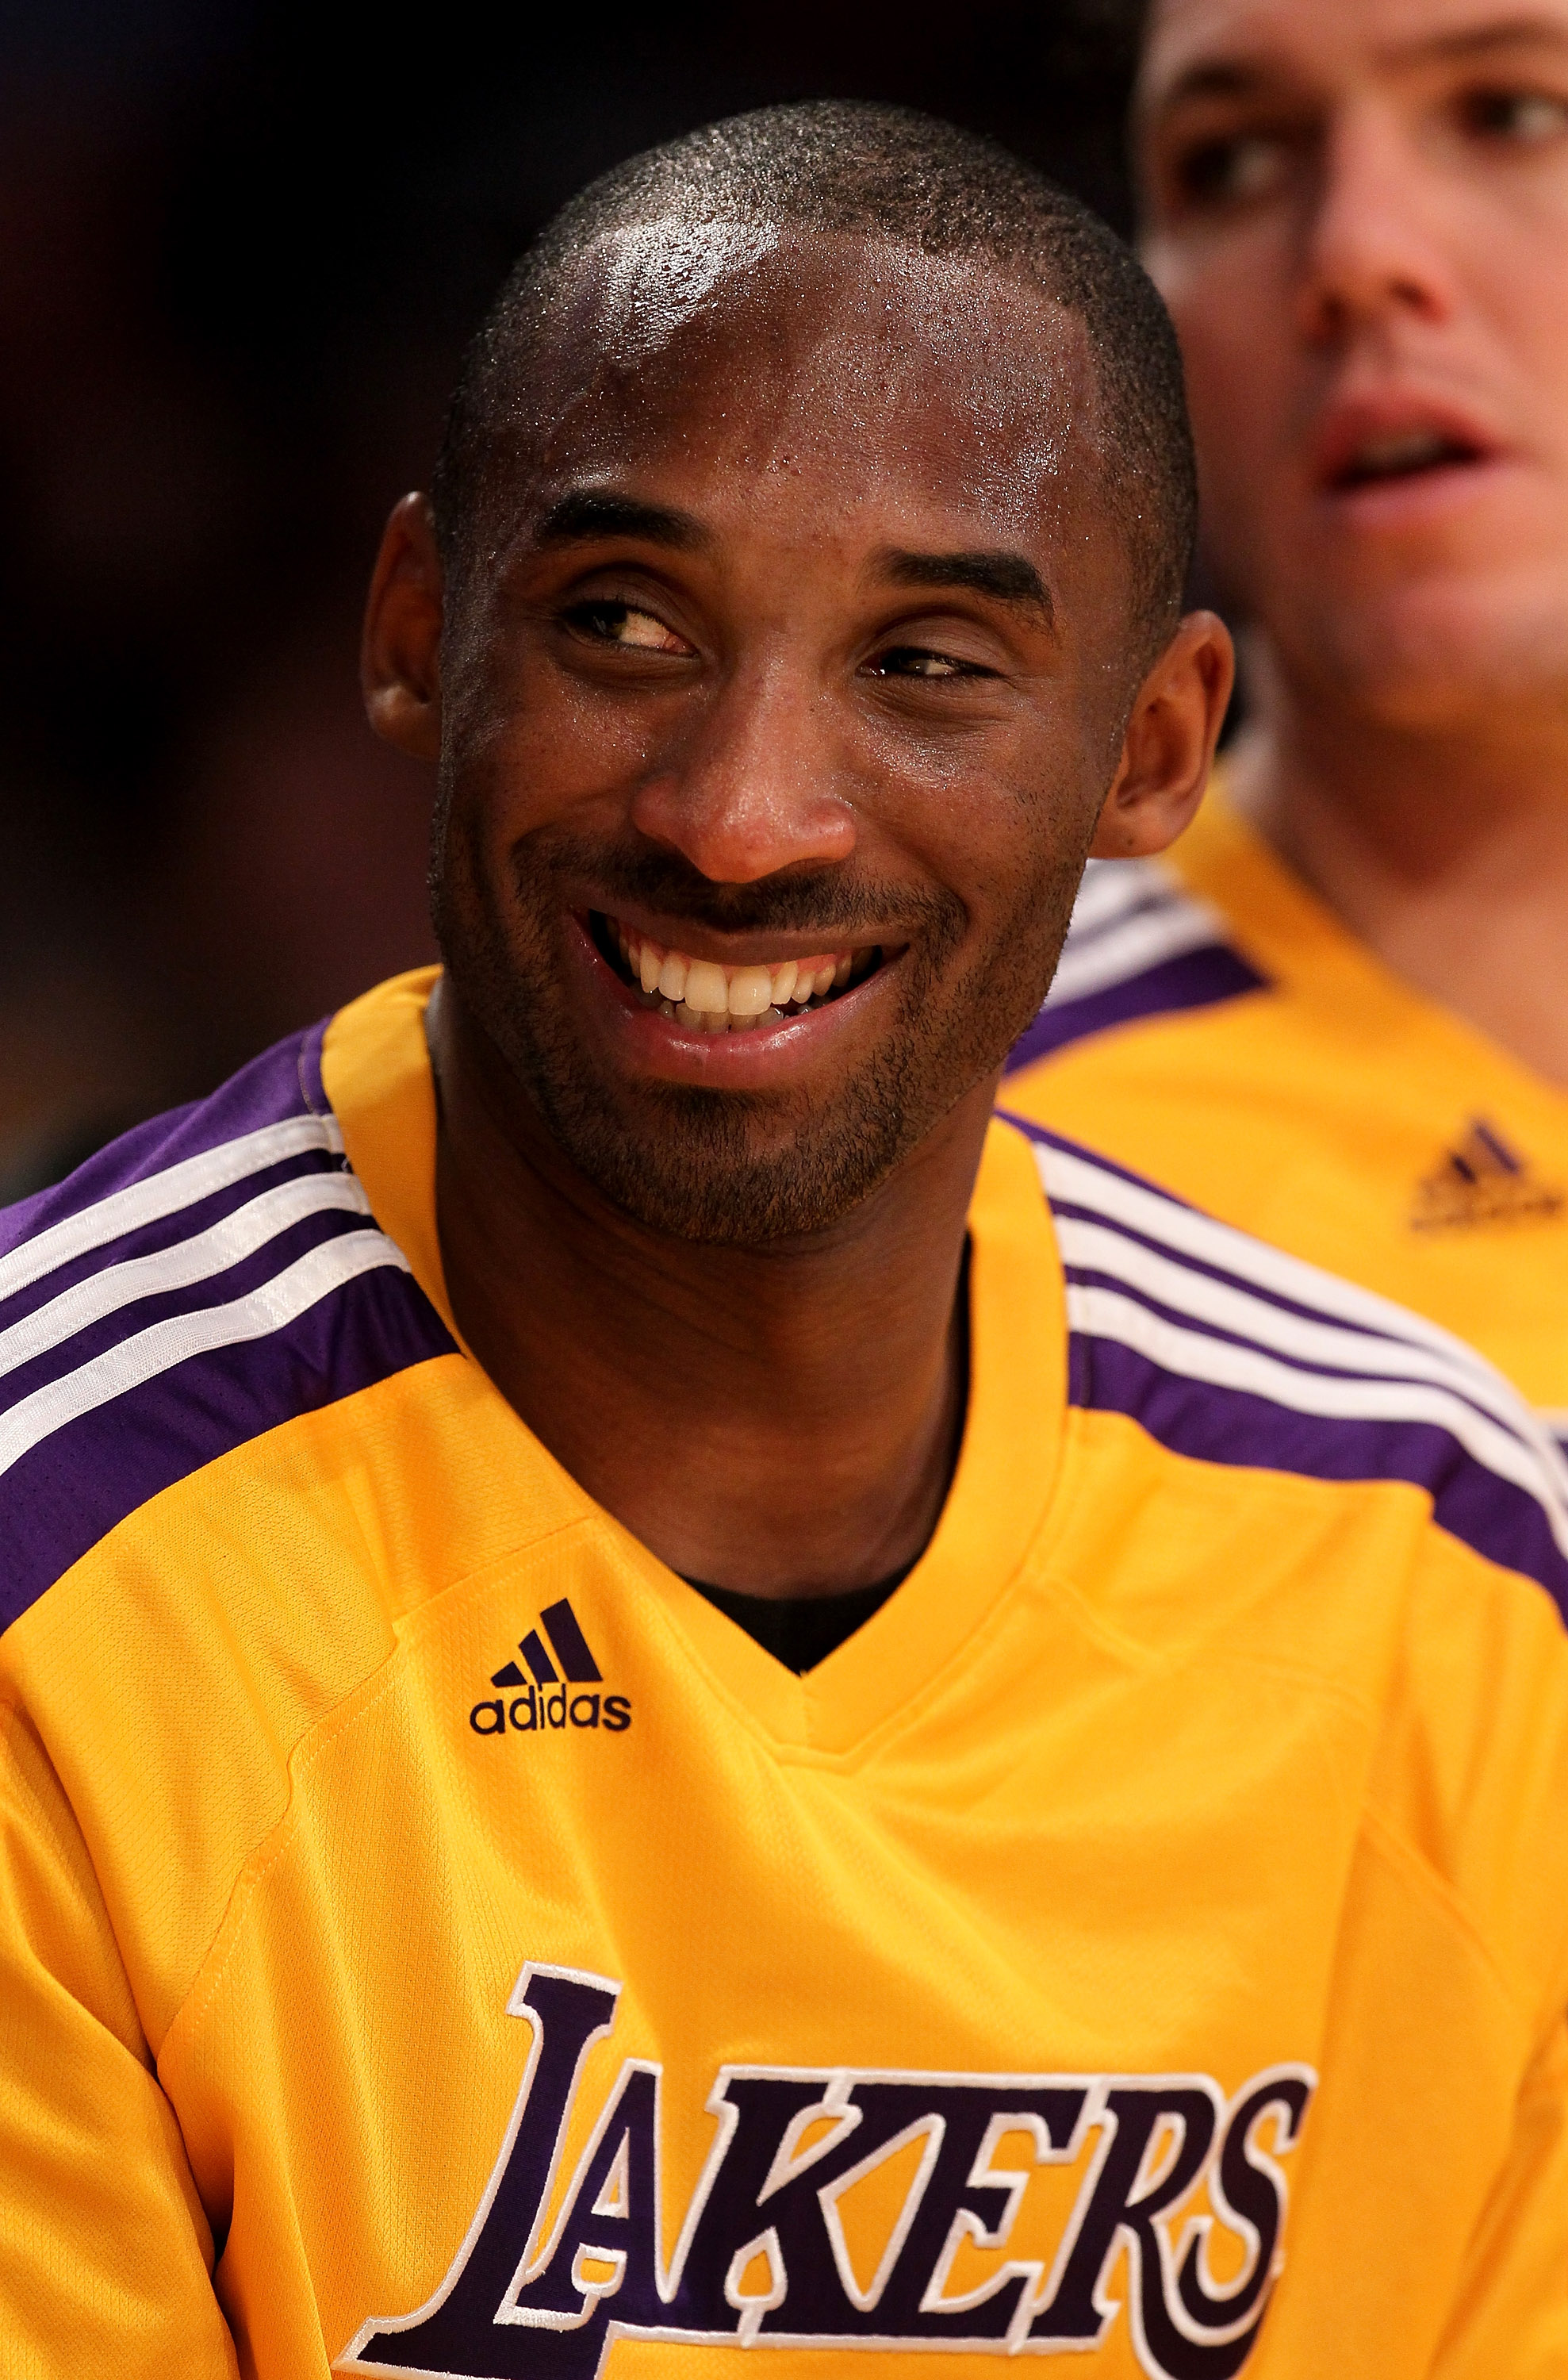 LOS ANGELES, CA - NOVEMBER 05:  Kobe Bryant #24 of the Los Angeles Lakers smiles on the bench in the game with the Toronto Raptors at Staples Center on November 5, 2010 in Los Angeles, California.  The Lakers won 108-102.   NOTE TO USER: User expressly ac